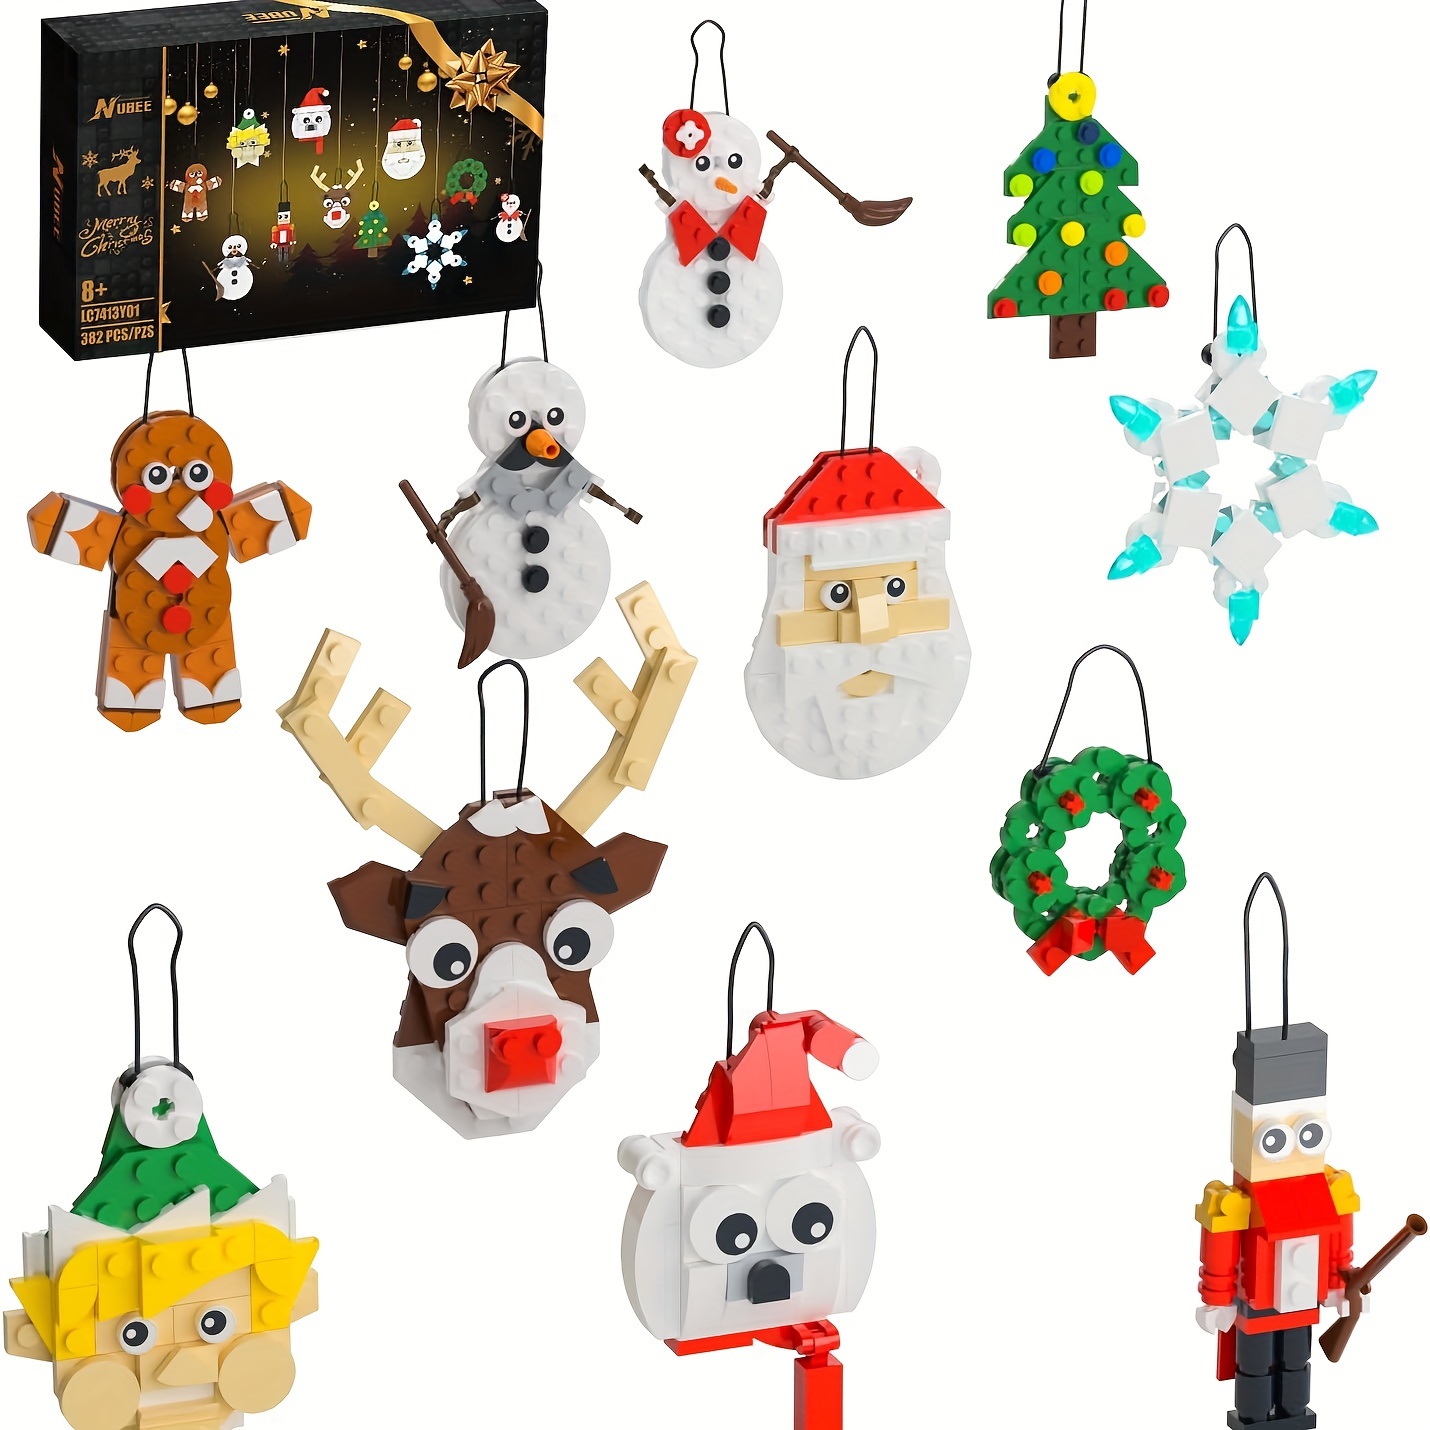 

11pcs/pack Christmas Toy Building Sets, Christmas Tree/wreath/santa/snowman/gingerbread/reindeer/nutcrackers/snowflake Included, Christmas Ornament Gifts